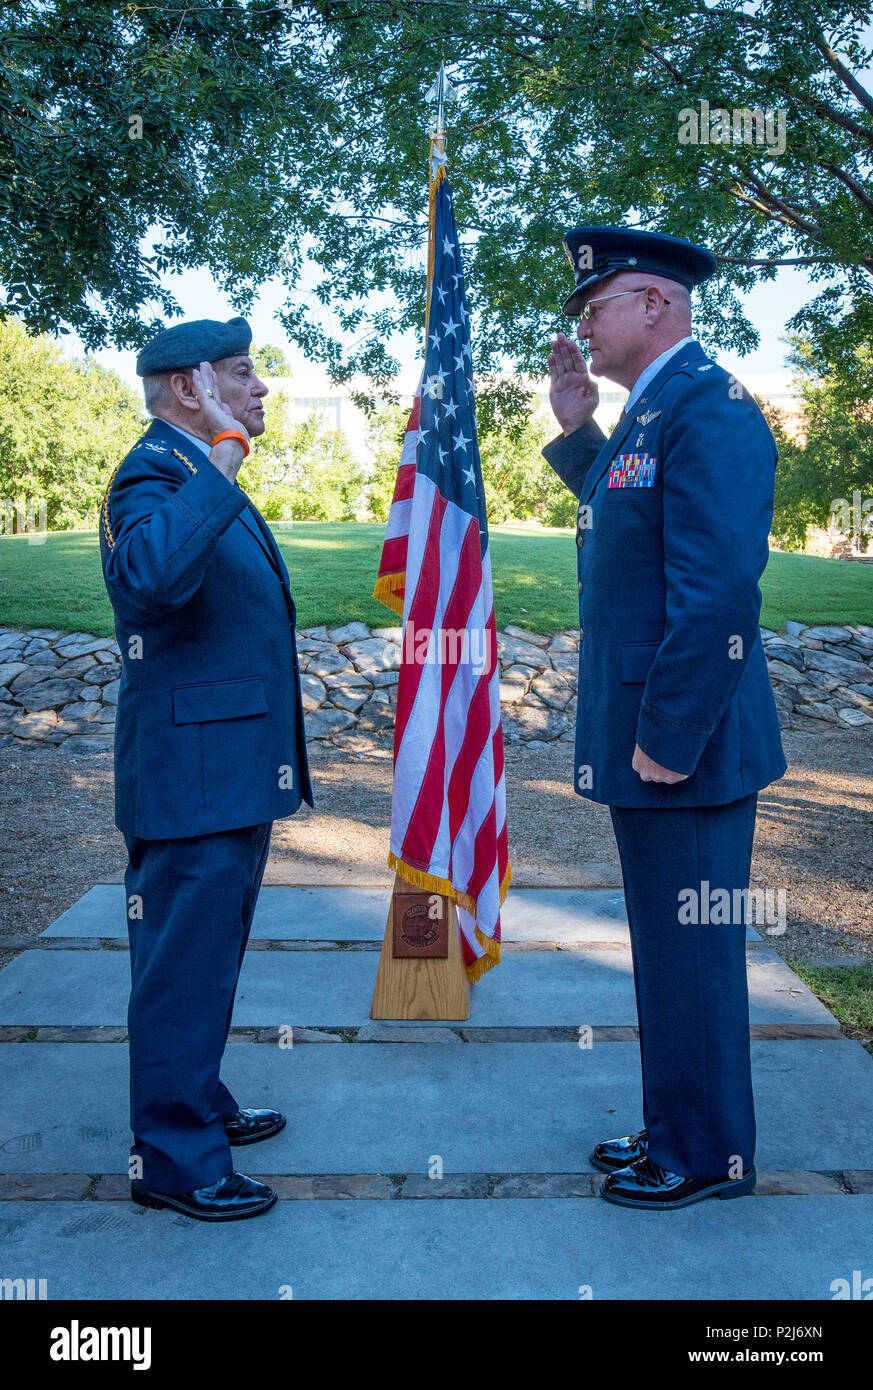 Retired U.S. Air Force Col. Sandy Edge gives the Oath of Office to Lt. Col. Michael E. Mac Lain - son of Clemson Tigers football players Sean and Eric - during Mac Lain’s promotion ceremony at the Scroll of Honor in Clemson University’s Memorial Park, Sept. 30, 2016. Mac Lain is the Aeromedical Operations Flight Commander for the 43rd  Aeromedical Evacuation Squadron, Pope Army Airfield, Fort Bragg, NC. He directs daily flight operations for 60 assigned personnel, and provides medical care as a Flight Nurse on aeromedical evacuation missions. Mac Lain has deployed nine times to combat zones an Stock Photo